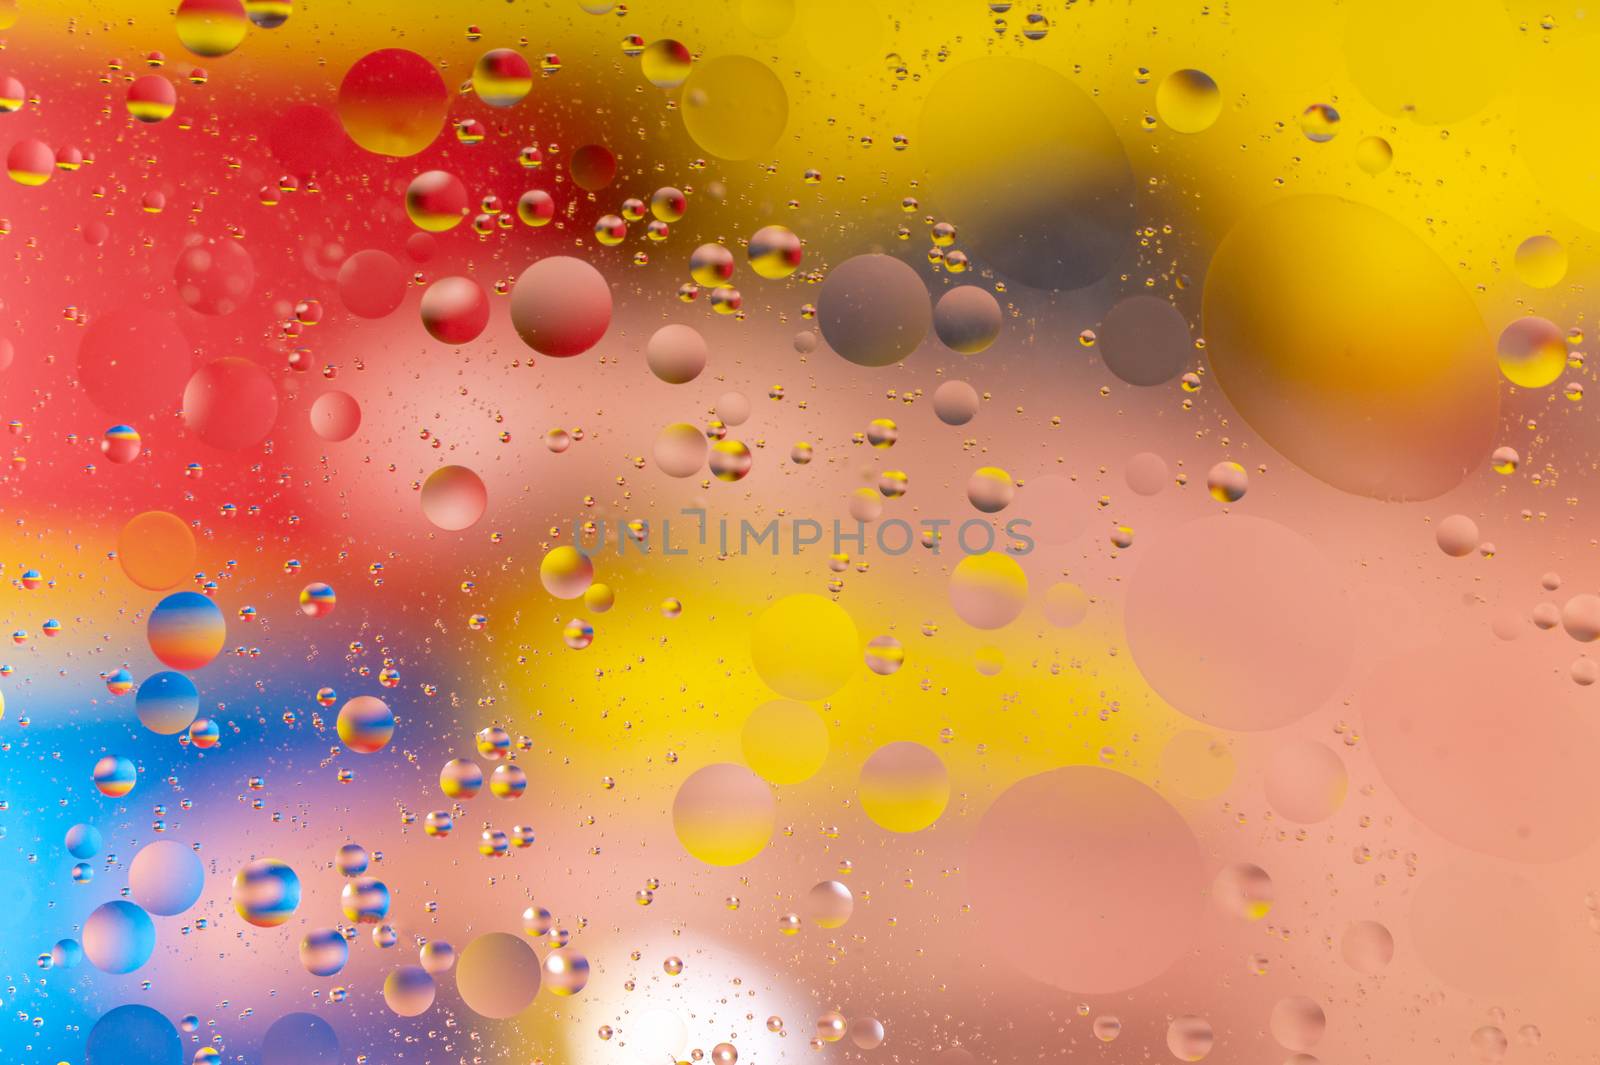 The abstract composition with oil drops in water. The abstract composition with oil drops in water. Many round drops on water surface.